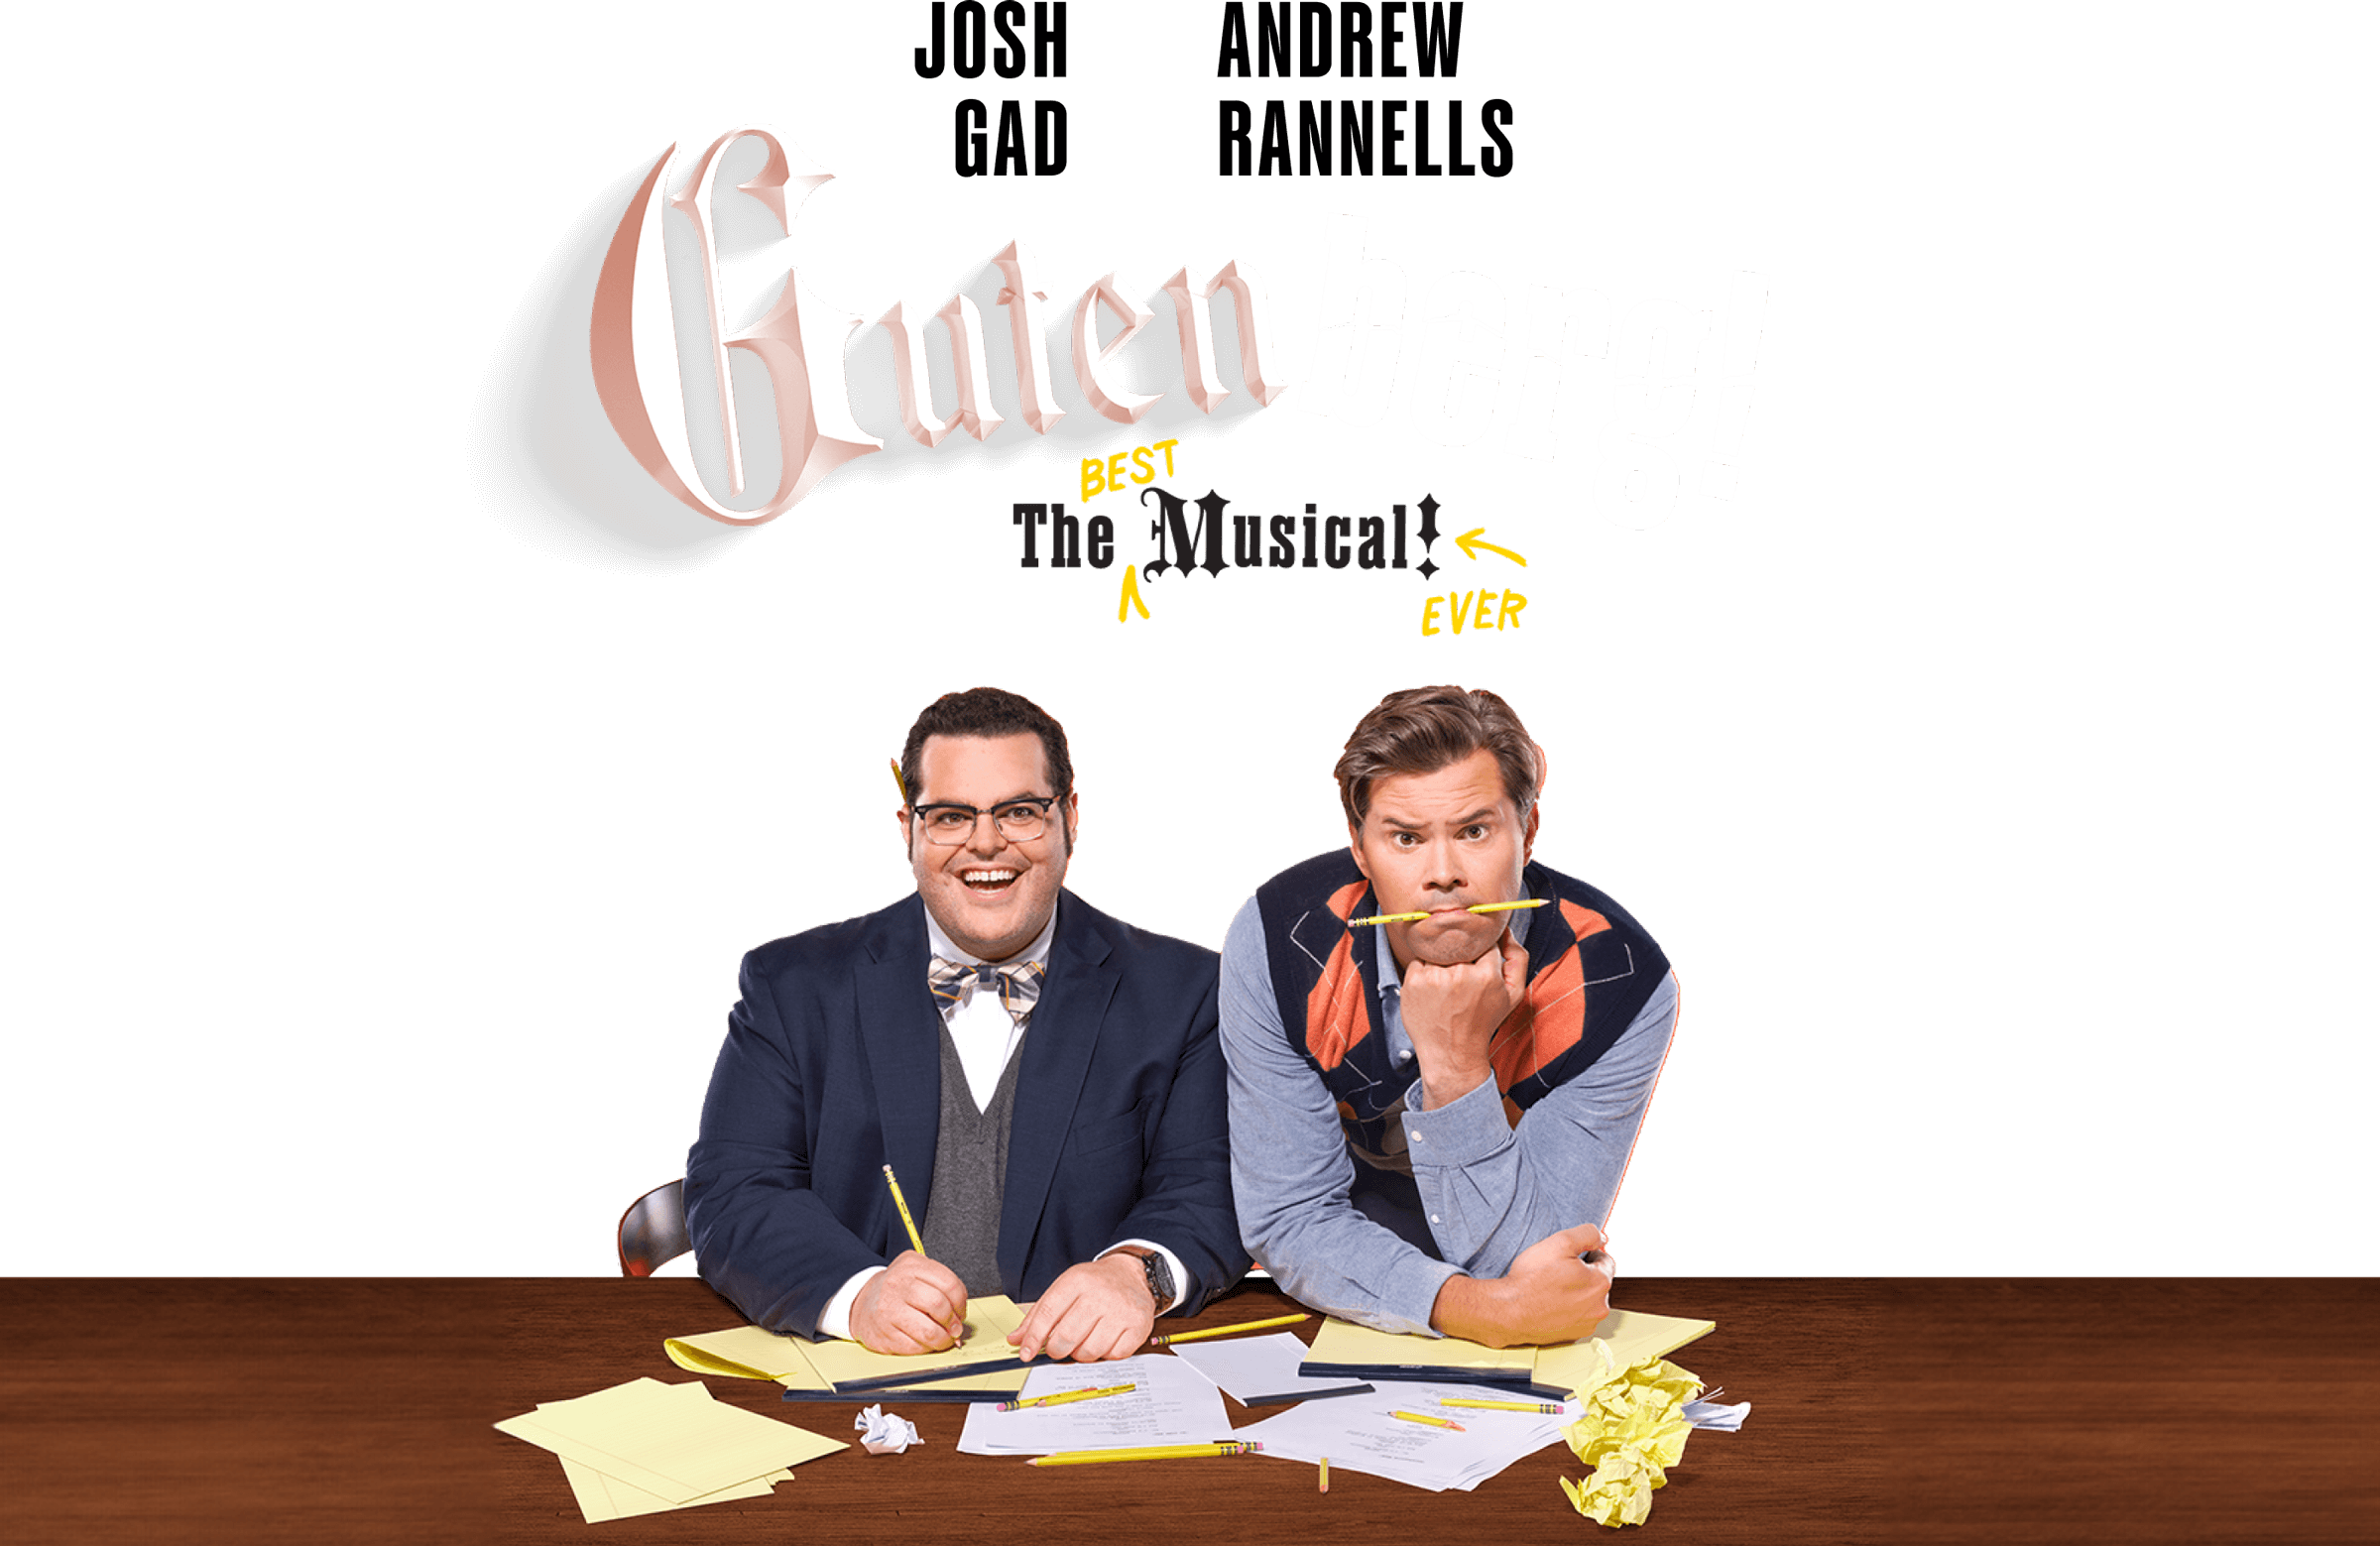 Show Art: Josh Gad, Andrew Rannells in Gutenberg! The best Musical ever Photo of Josh Gad (Bud Davenport) and Andrew Rannells (Doug Simon) at a table writing with Rannells holding a pencil in his mouth.